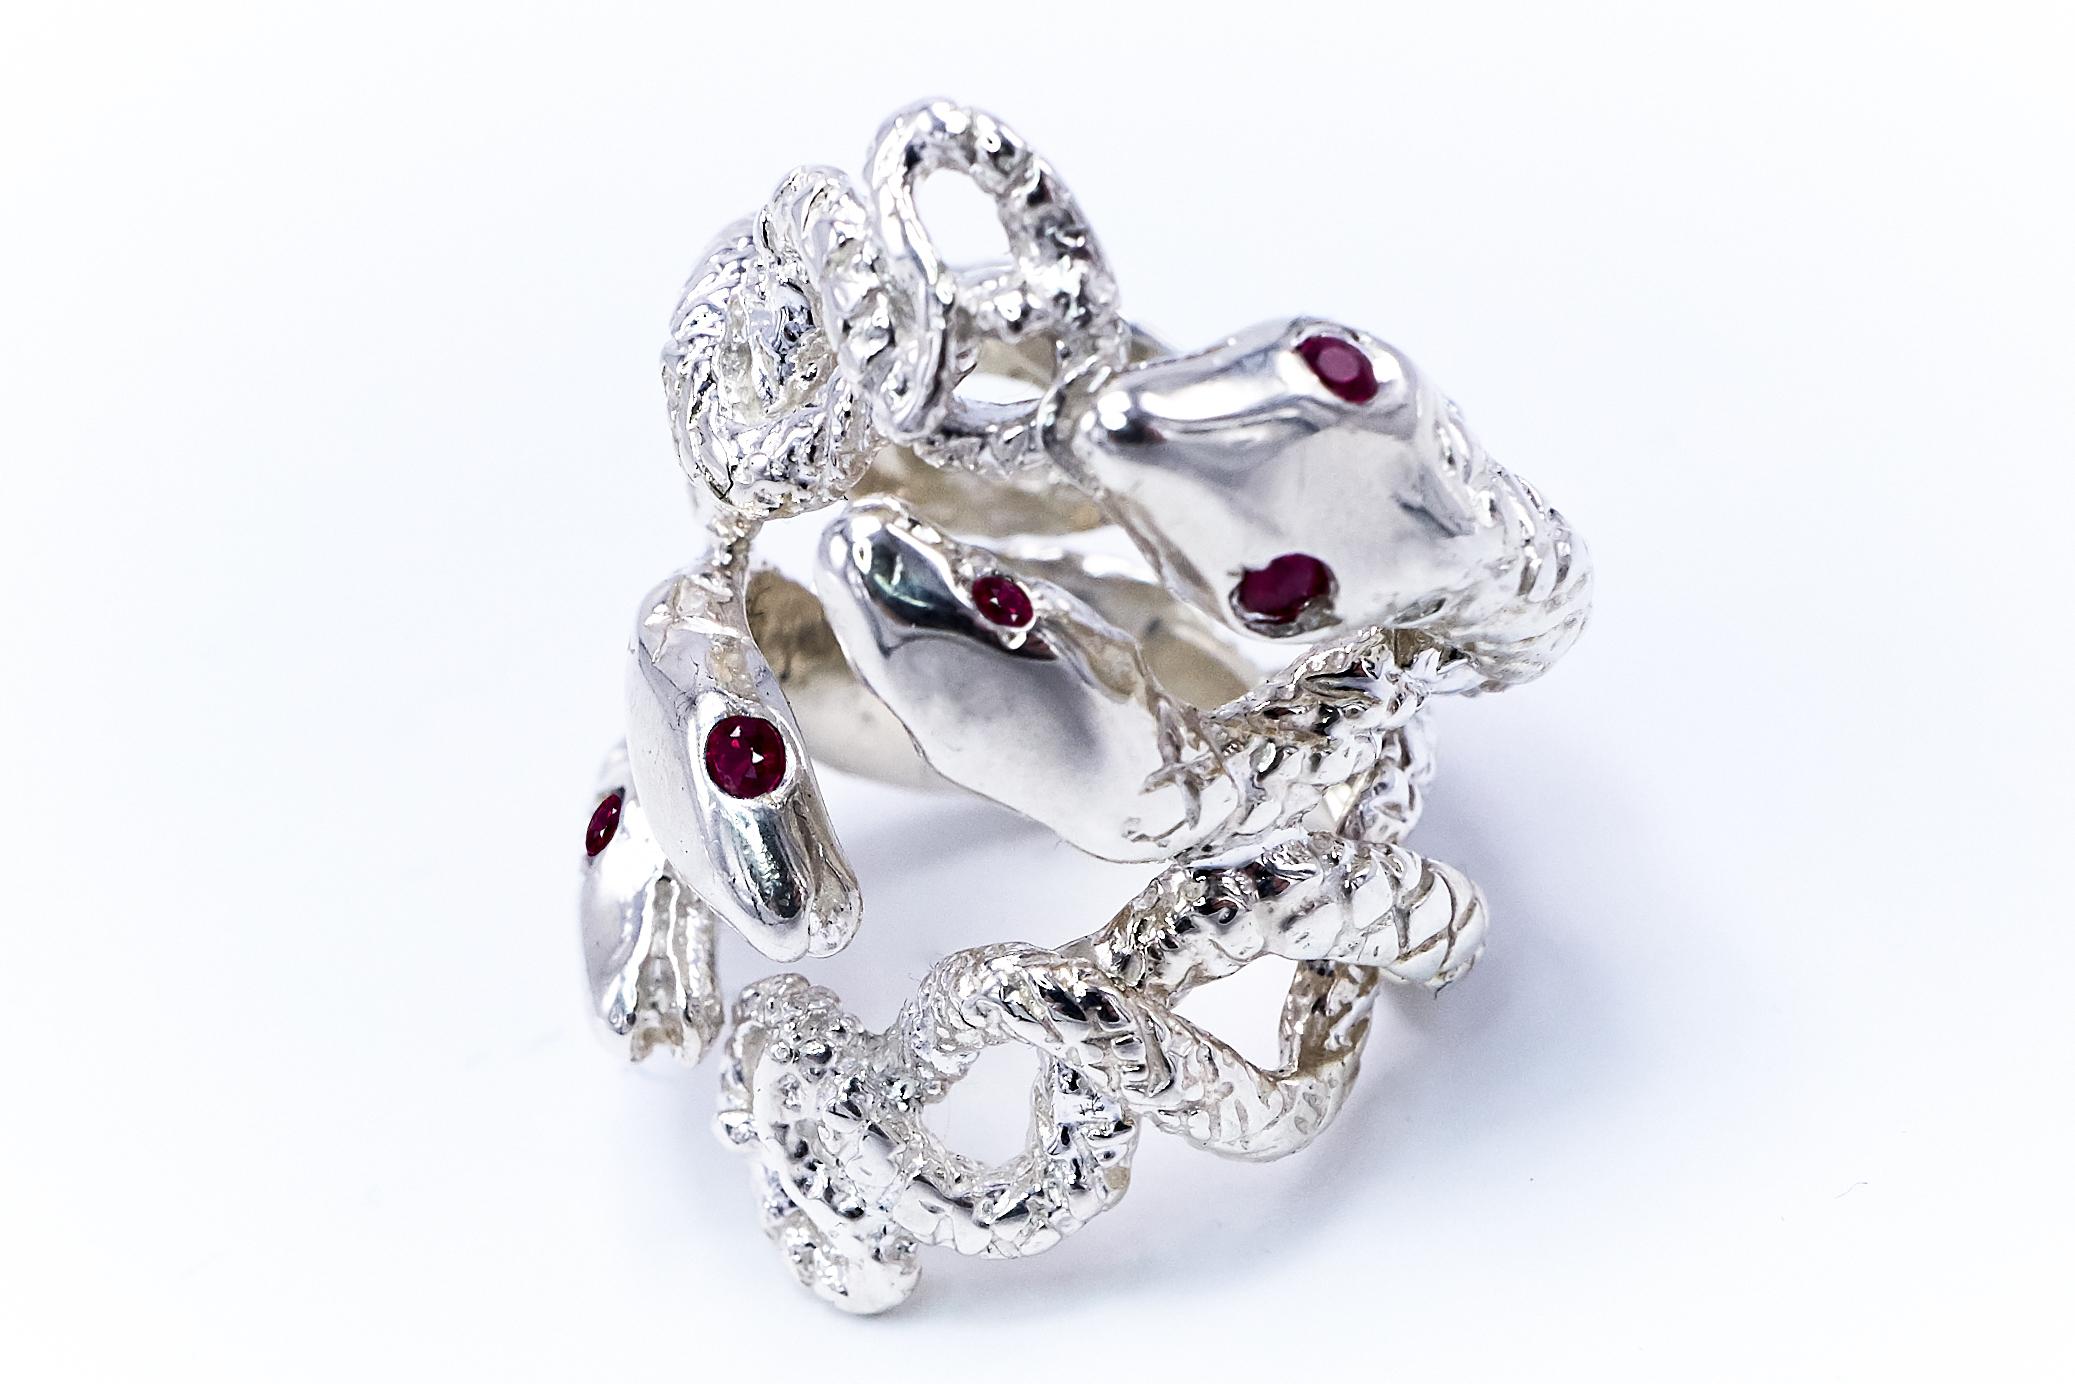 Ruby Snake Ring Silver Statement Cocktail Ring J Dauphin

J DAUPHIN 